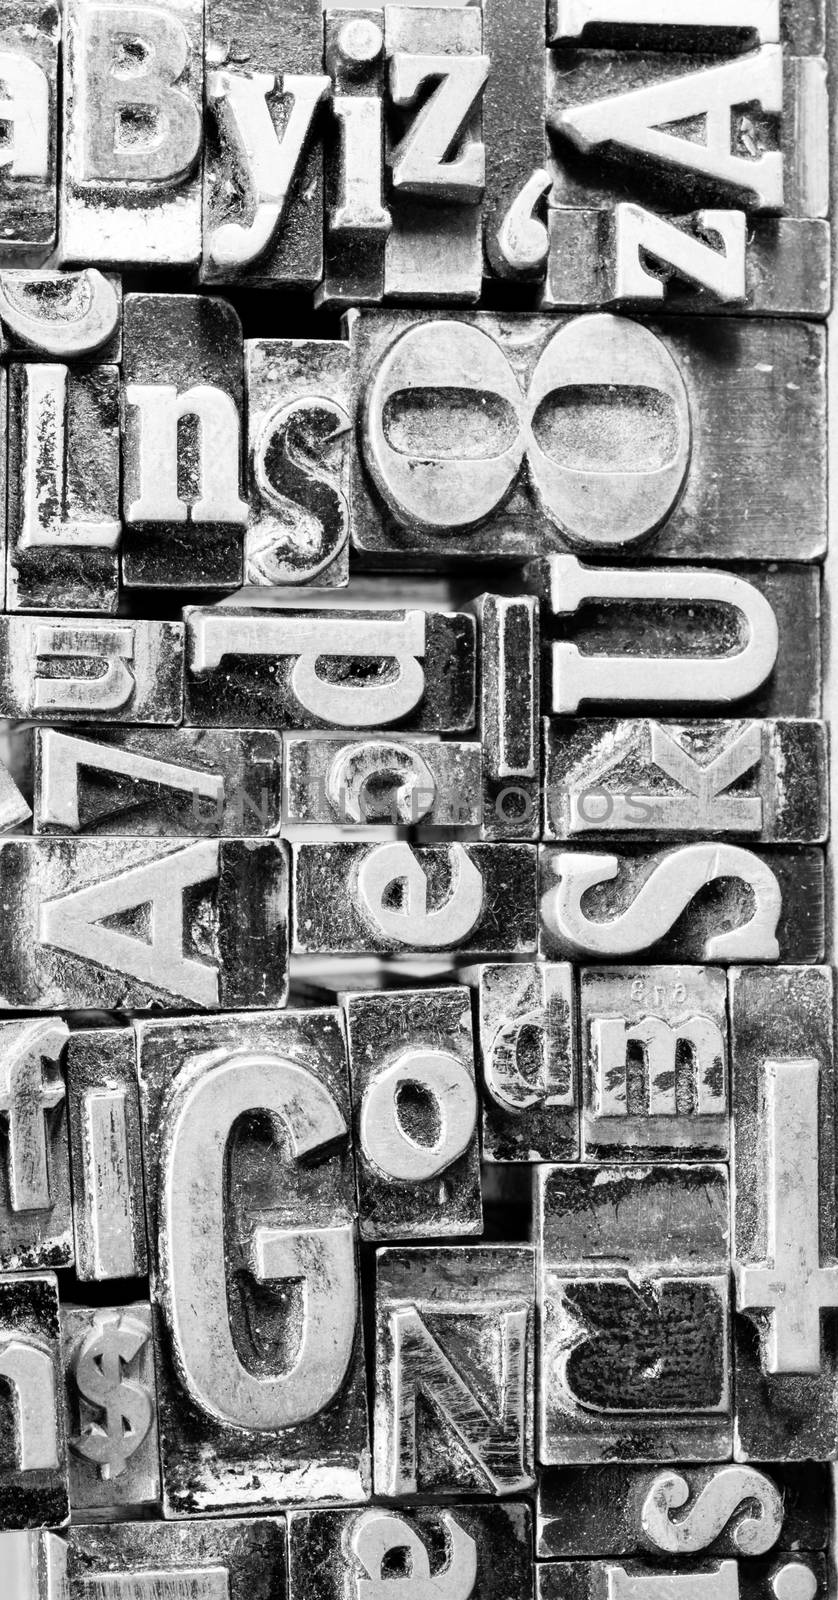 Metal Type Printing Press Typeset Obsolete Typography Text Letter by ChrisBoswell